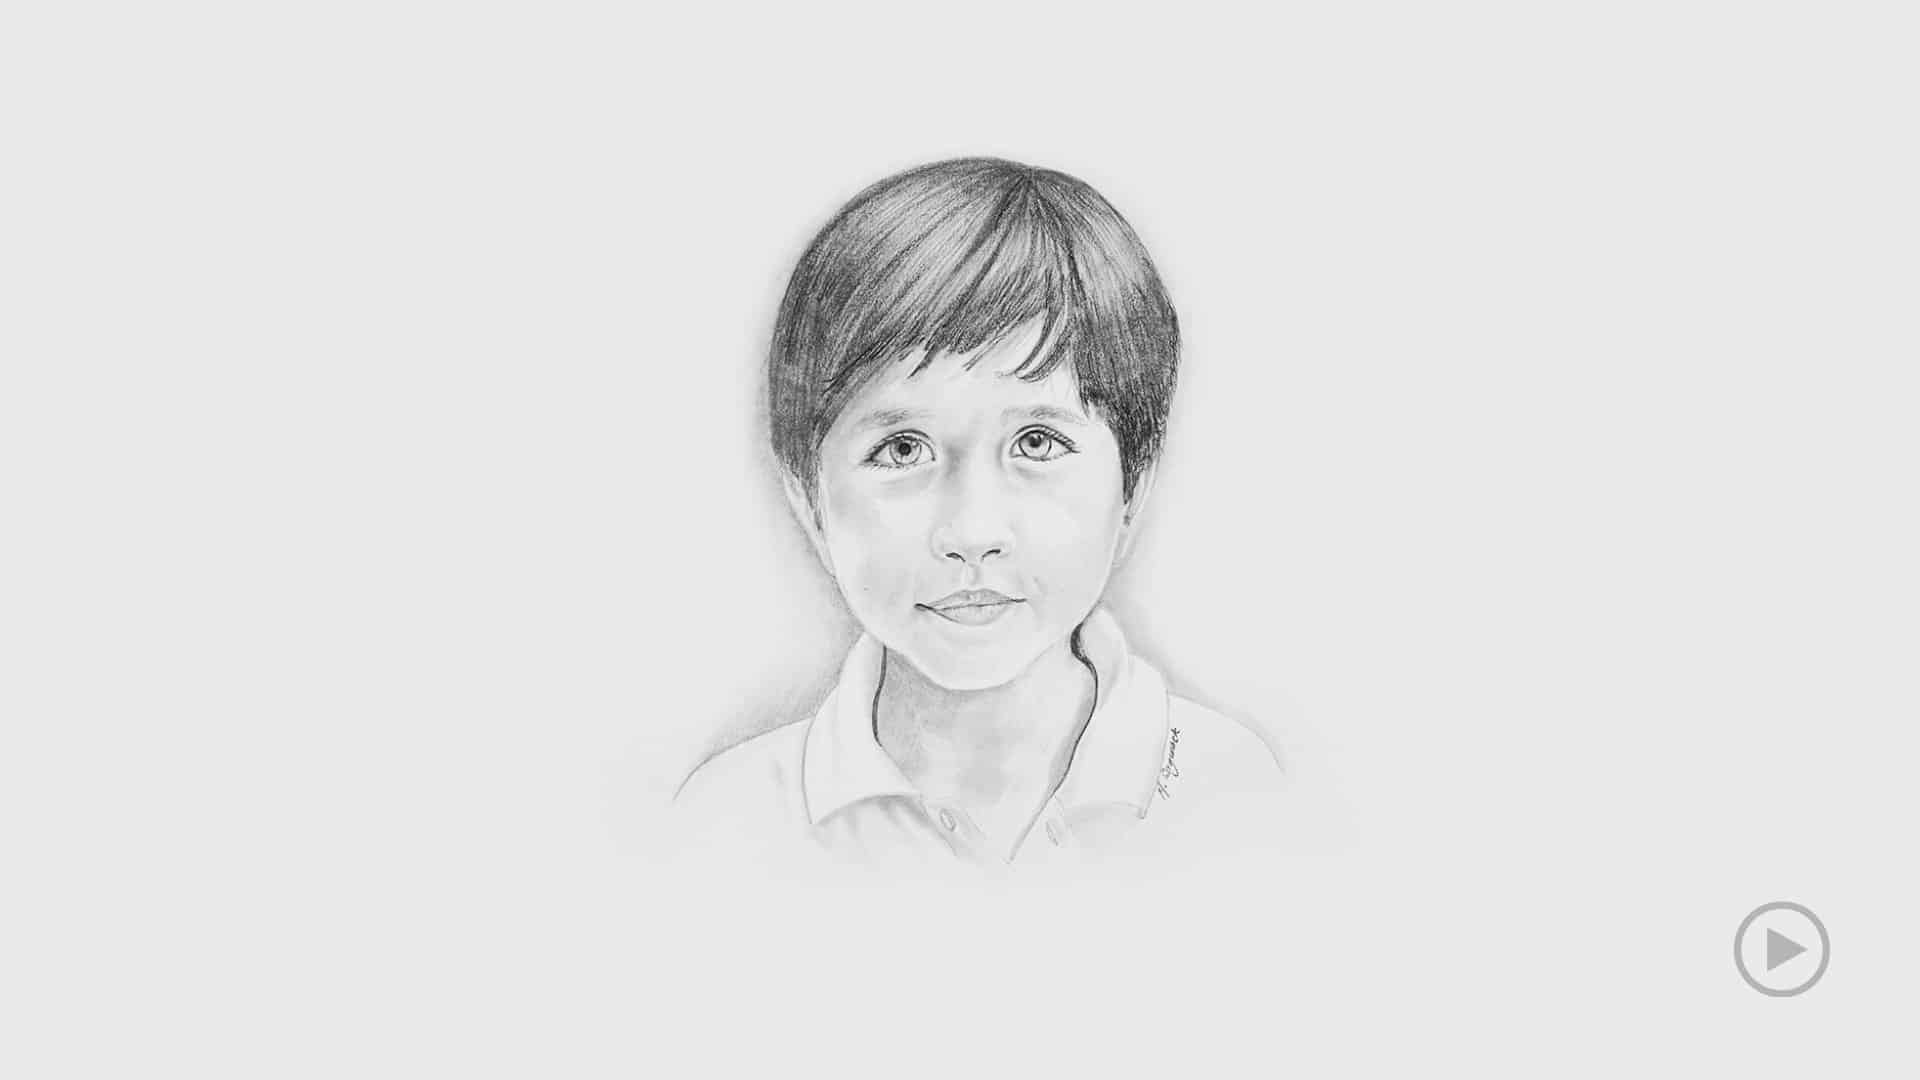 Time-lapse pencil drawing of 7 year old boy with beautiful eyes and a shy smile.